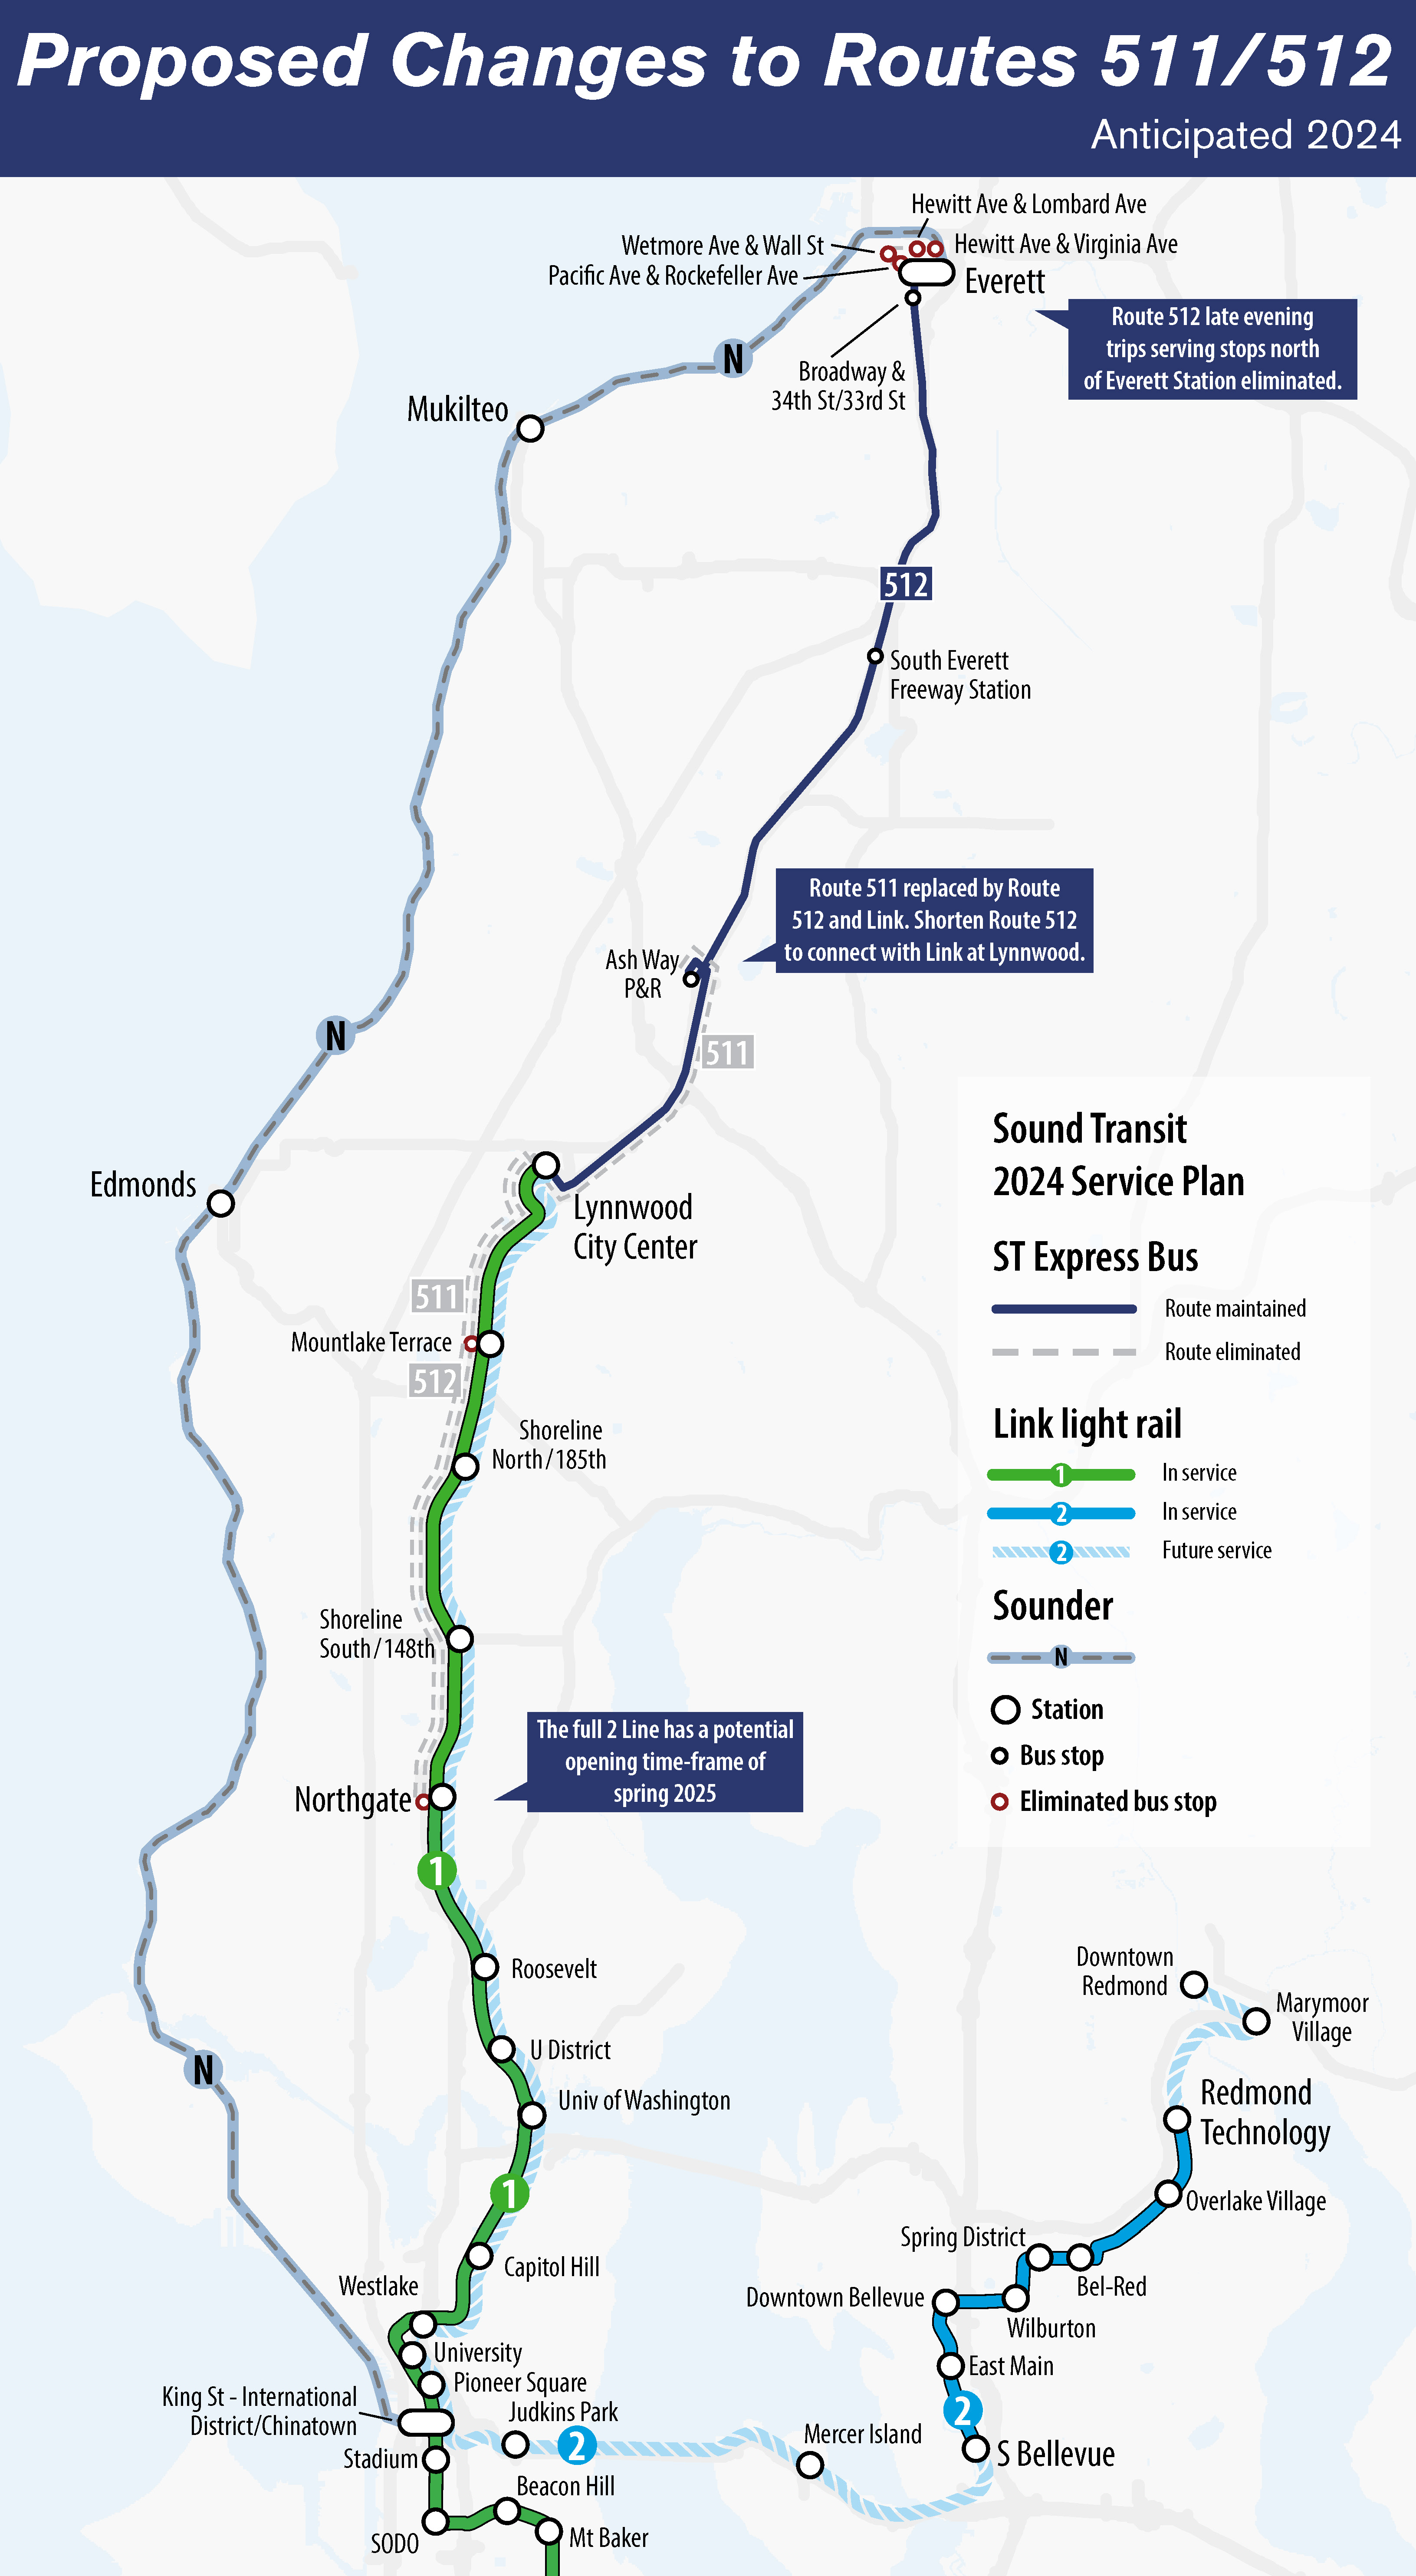 A map showing Express route 511 as it relates to Sound Transit's transit services in Seattle and the north and east subareas that include Everett, Seattle and Redmond. 


        The map shows Express route 511 in a light gray dotted line compared to the more strongly colored routes depicting Sounder train service, Link light rail service and other Express bus routes. 
        
        
        Express route 511 is depicted in light gray (as it is currently suspended), as it ran between south Everett and Northgate. The proposed route change will formally eliminate Express route 511 once Lynnwood Link Extension opens since the service area will be serviced by other Sound Transit services such as Link light rail and other Express bus routes. Route 512 will replace 511's service area to give the area more frequent service, including weekends.